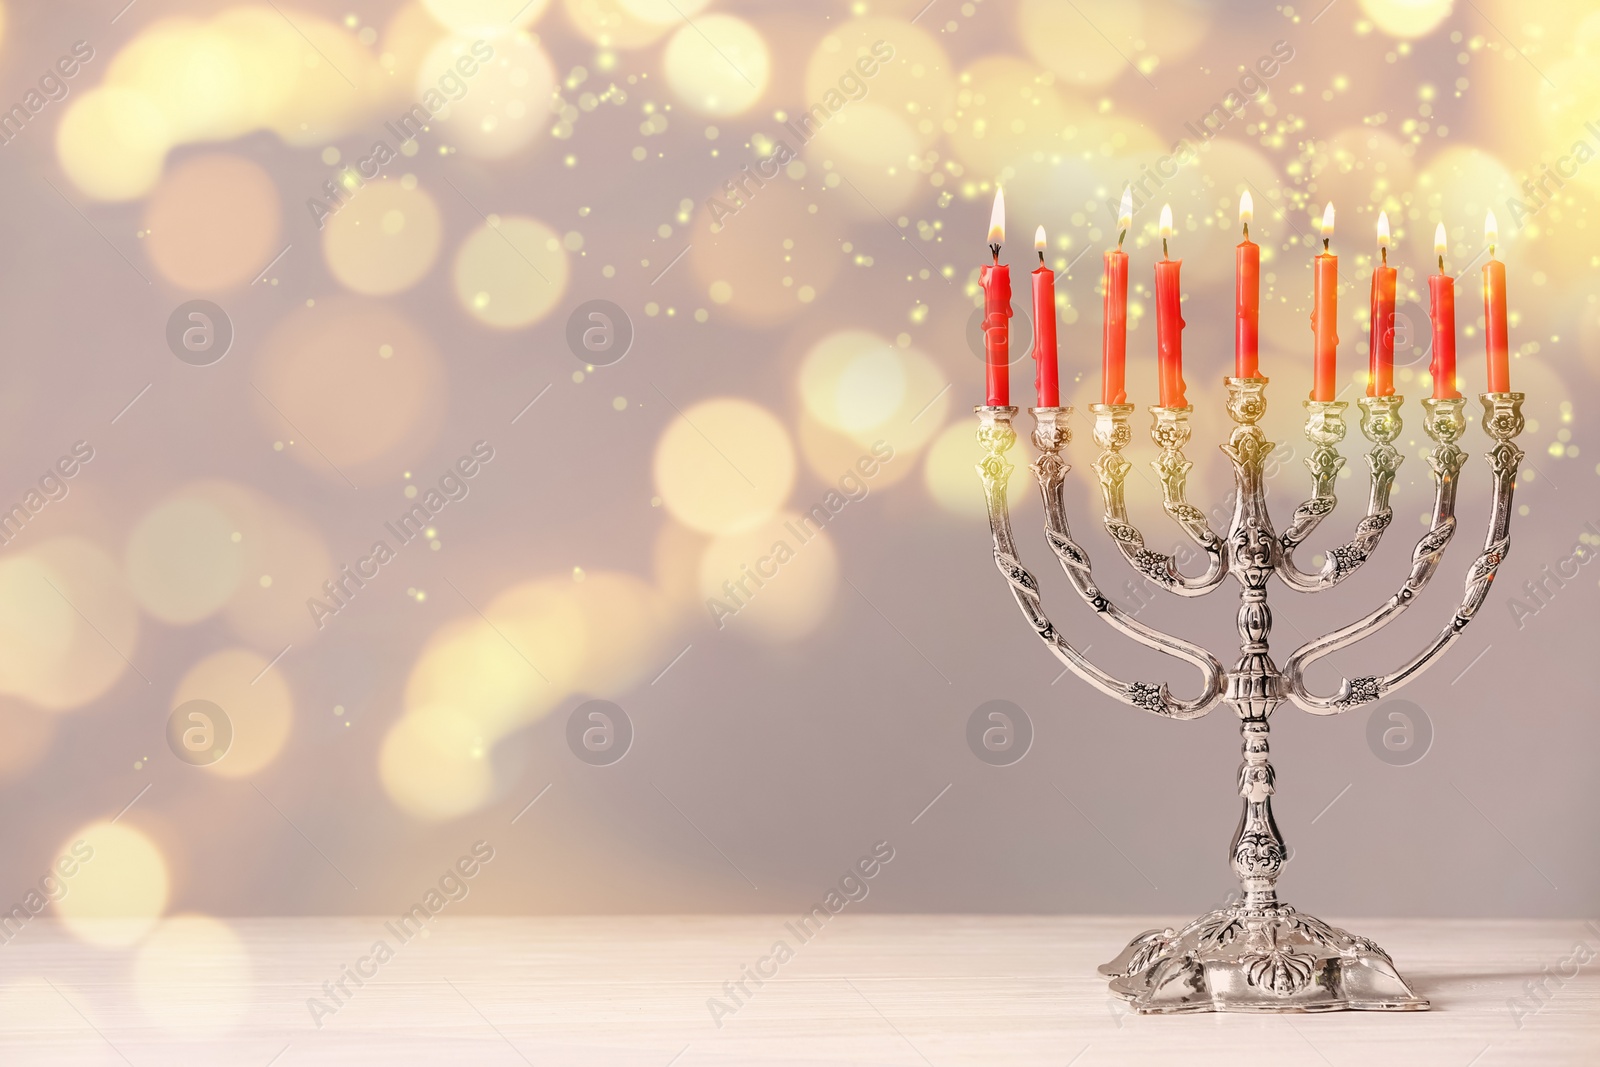 Image of Silver menorah with burning candles on table against light background, space for text. Hanukkah celebration